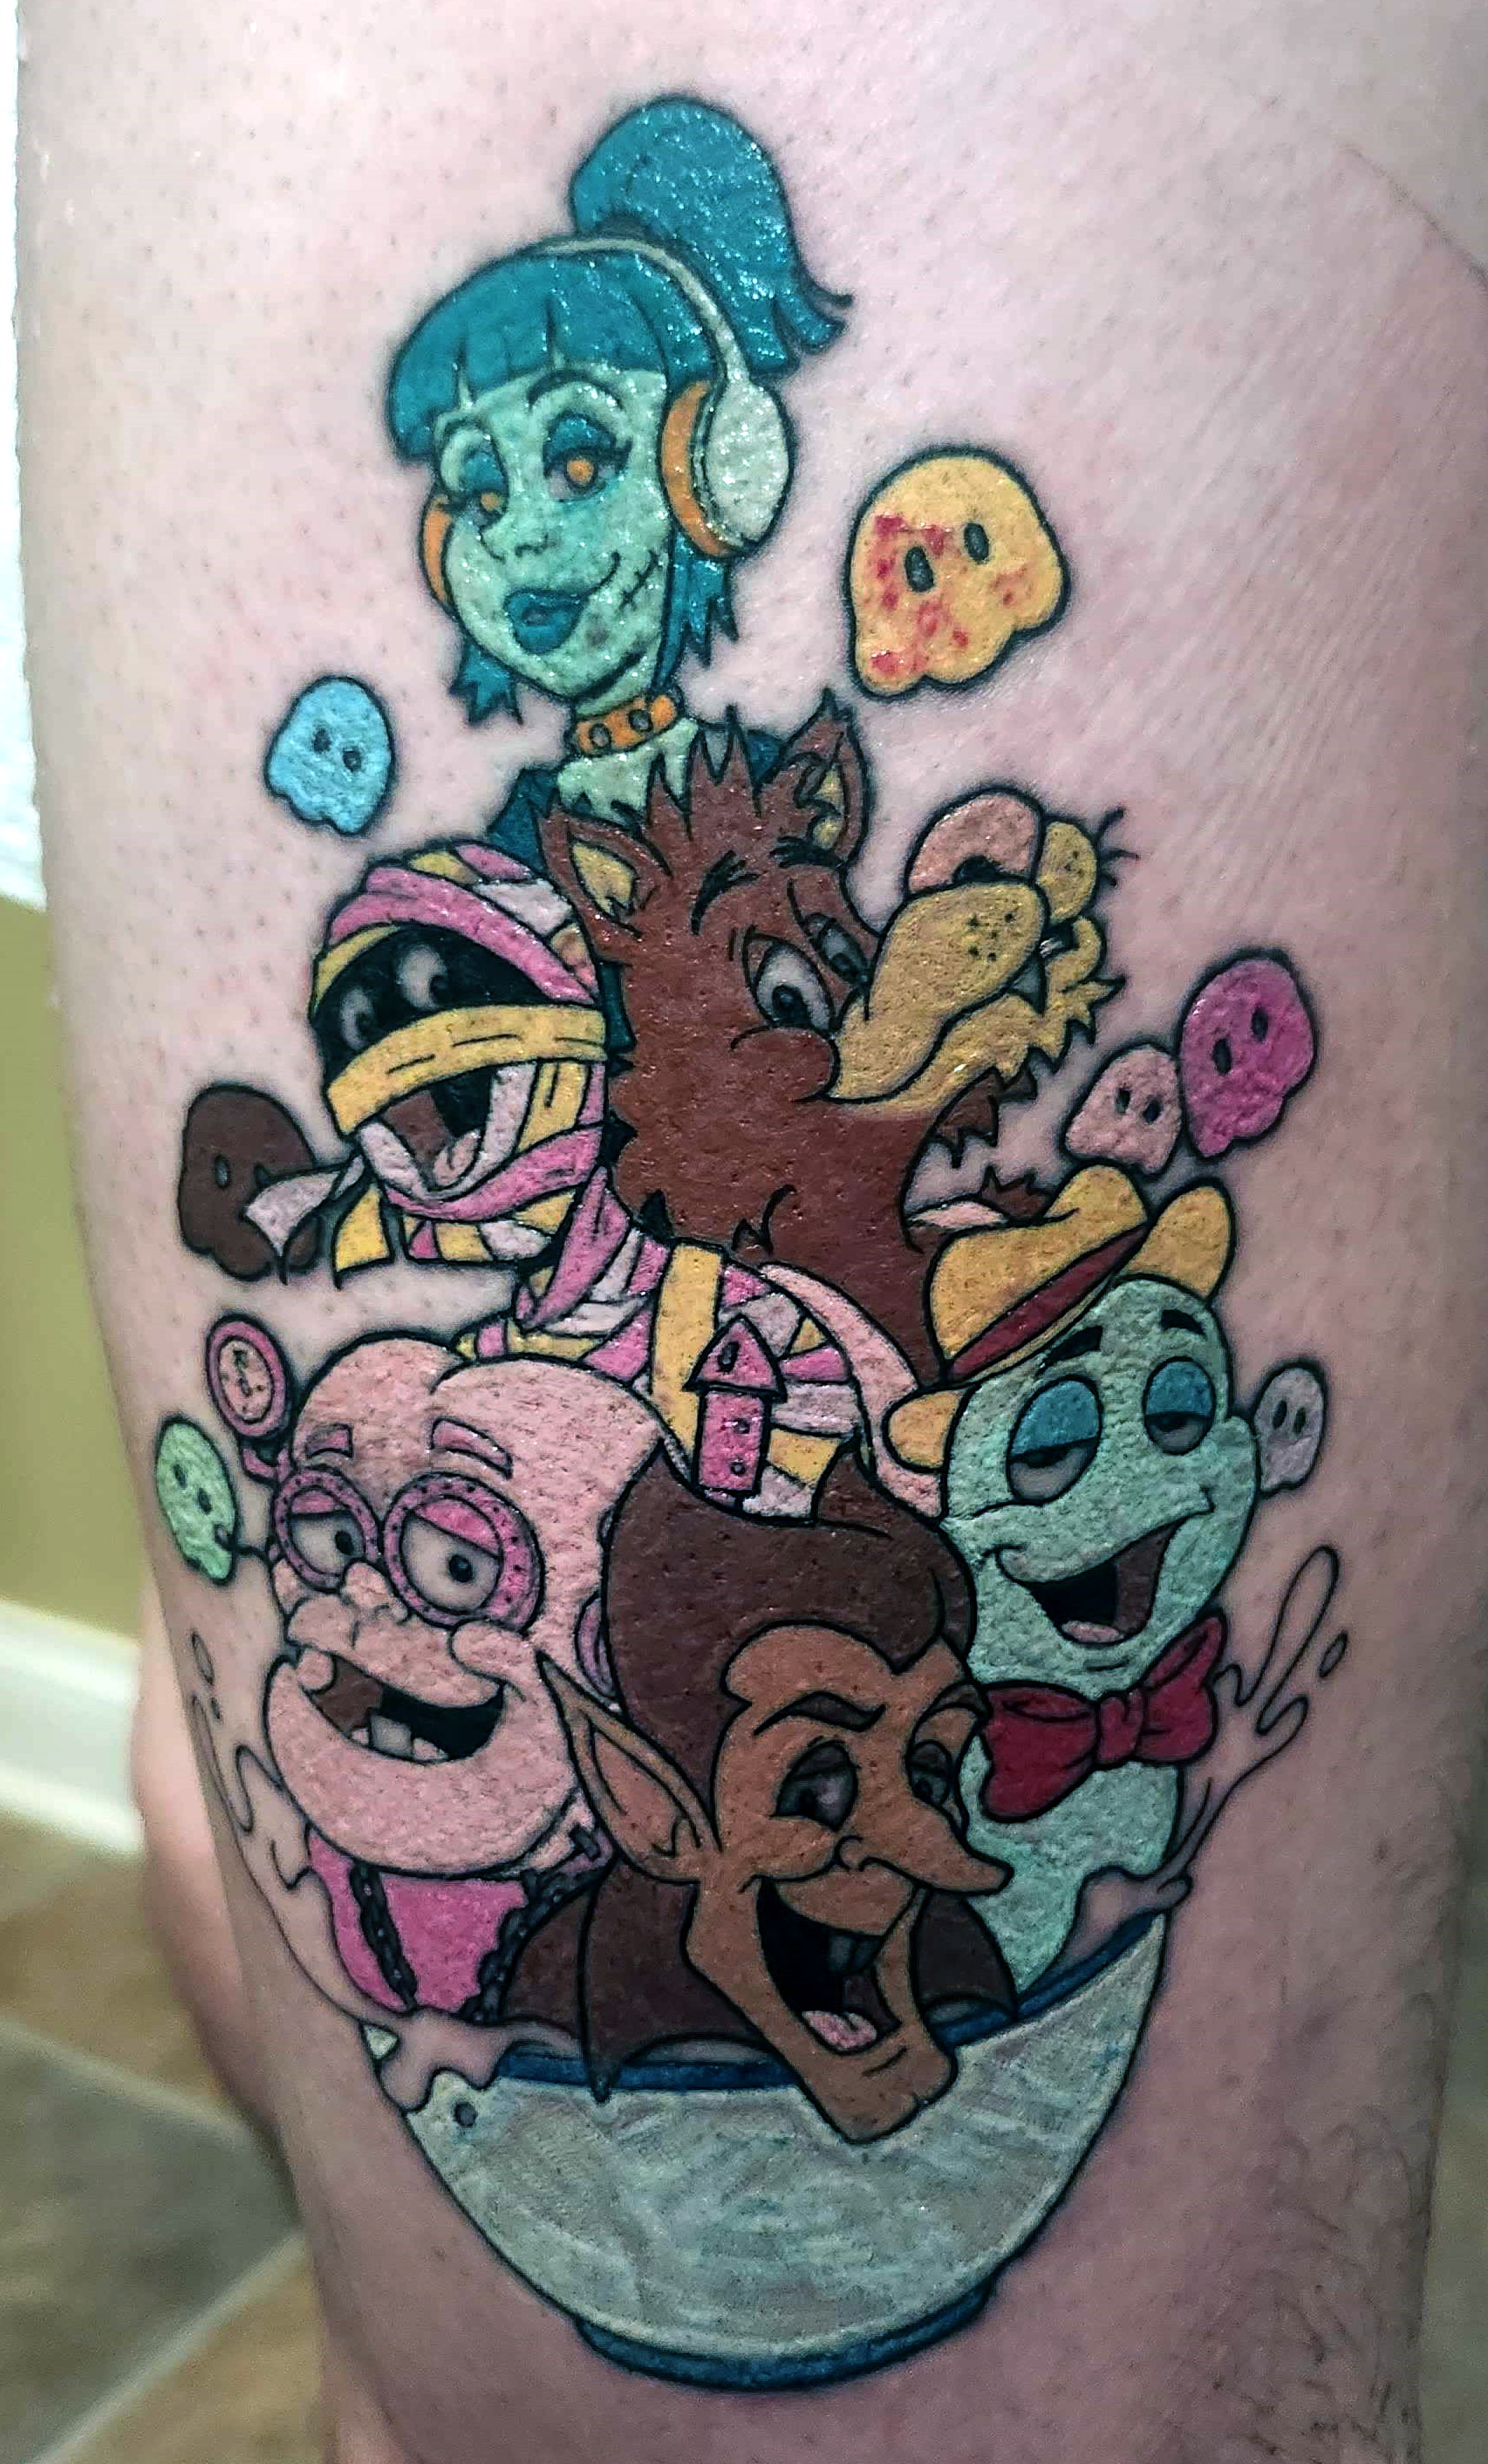 a monster cereal mascot tattoo